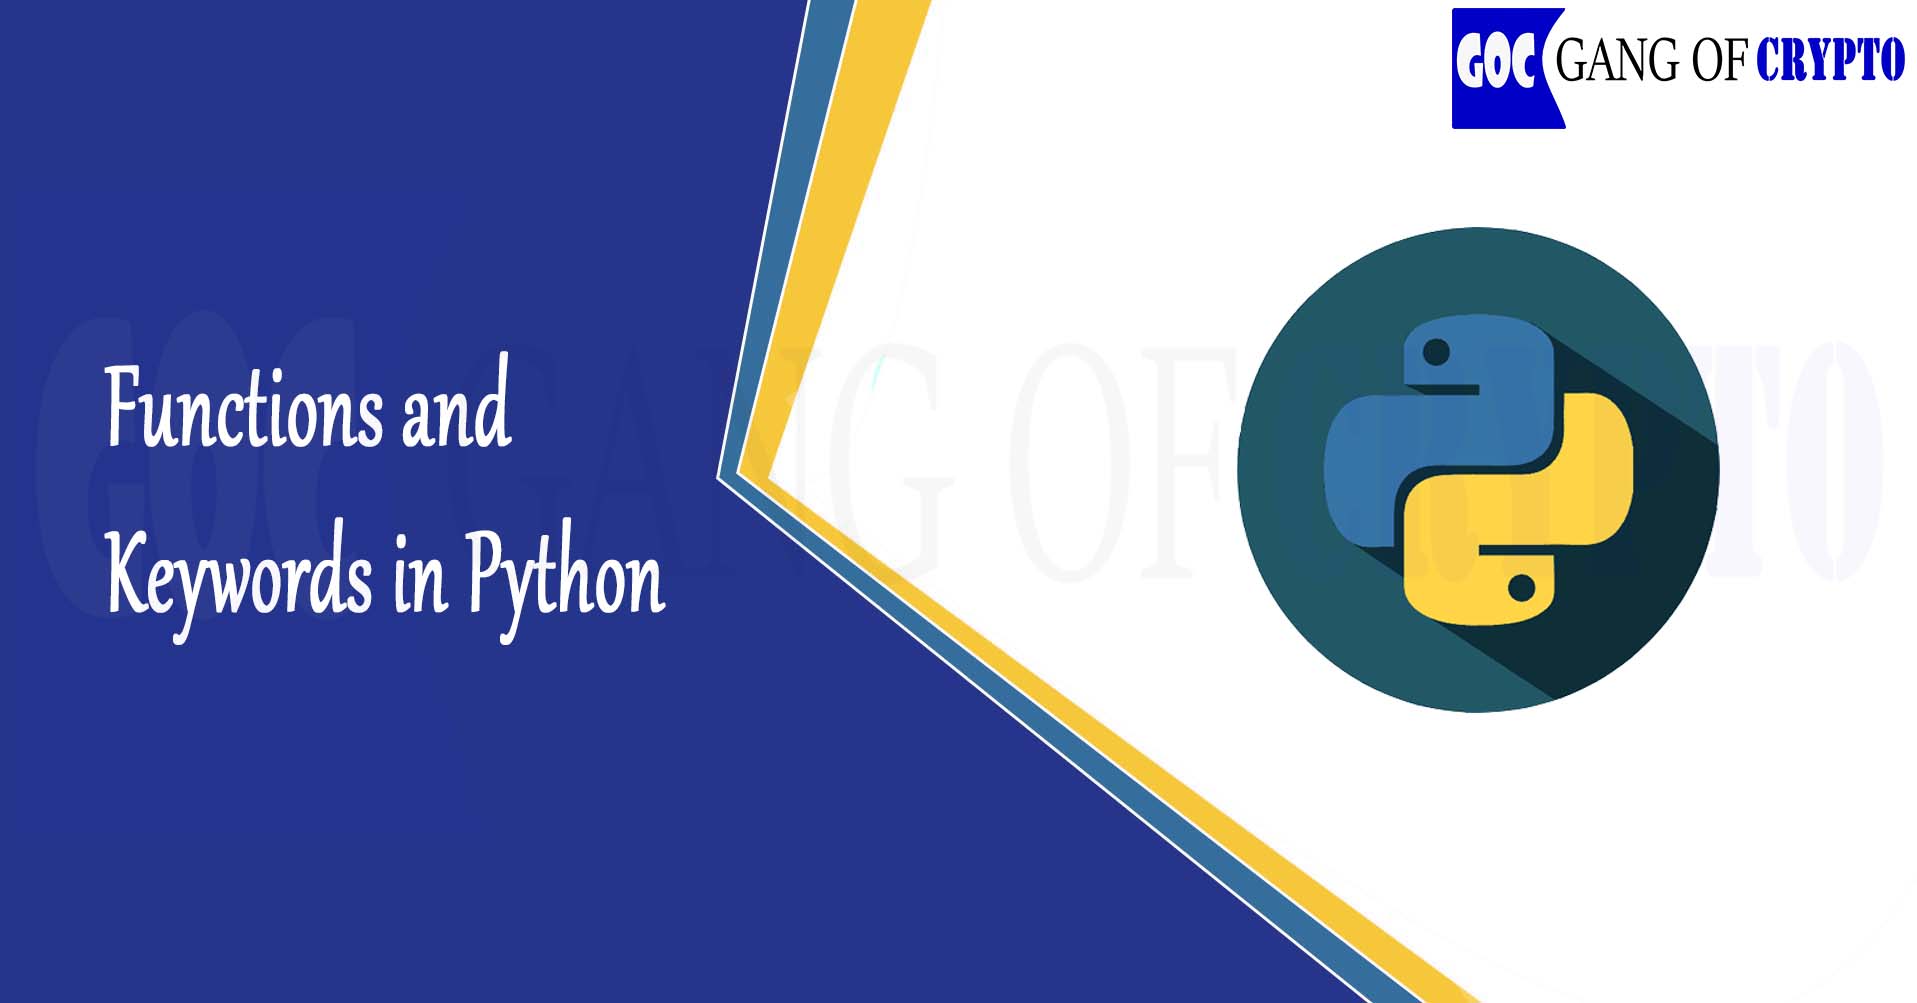 Functions and Keywords in Python